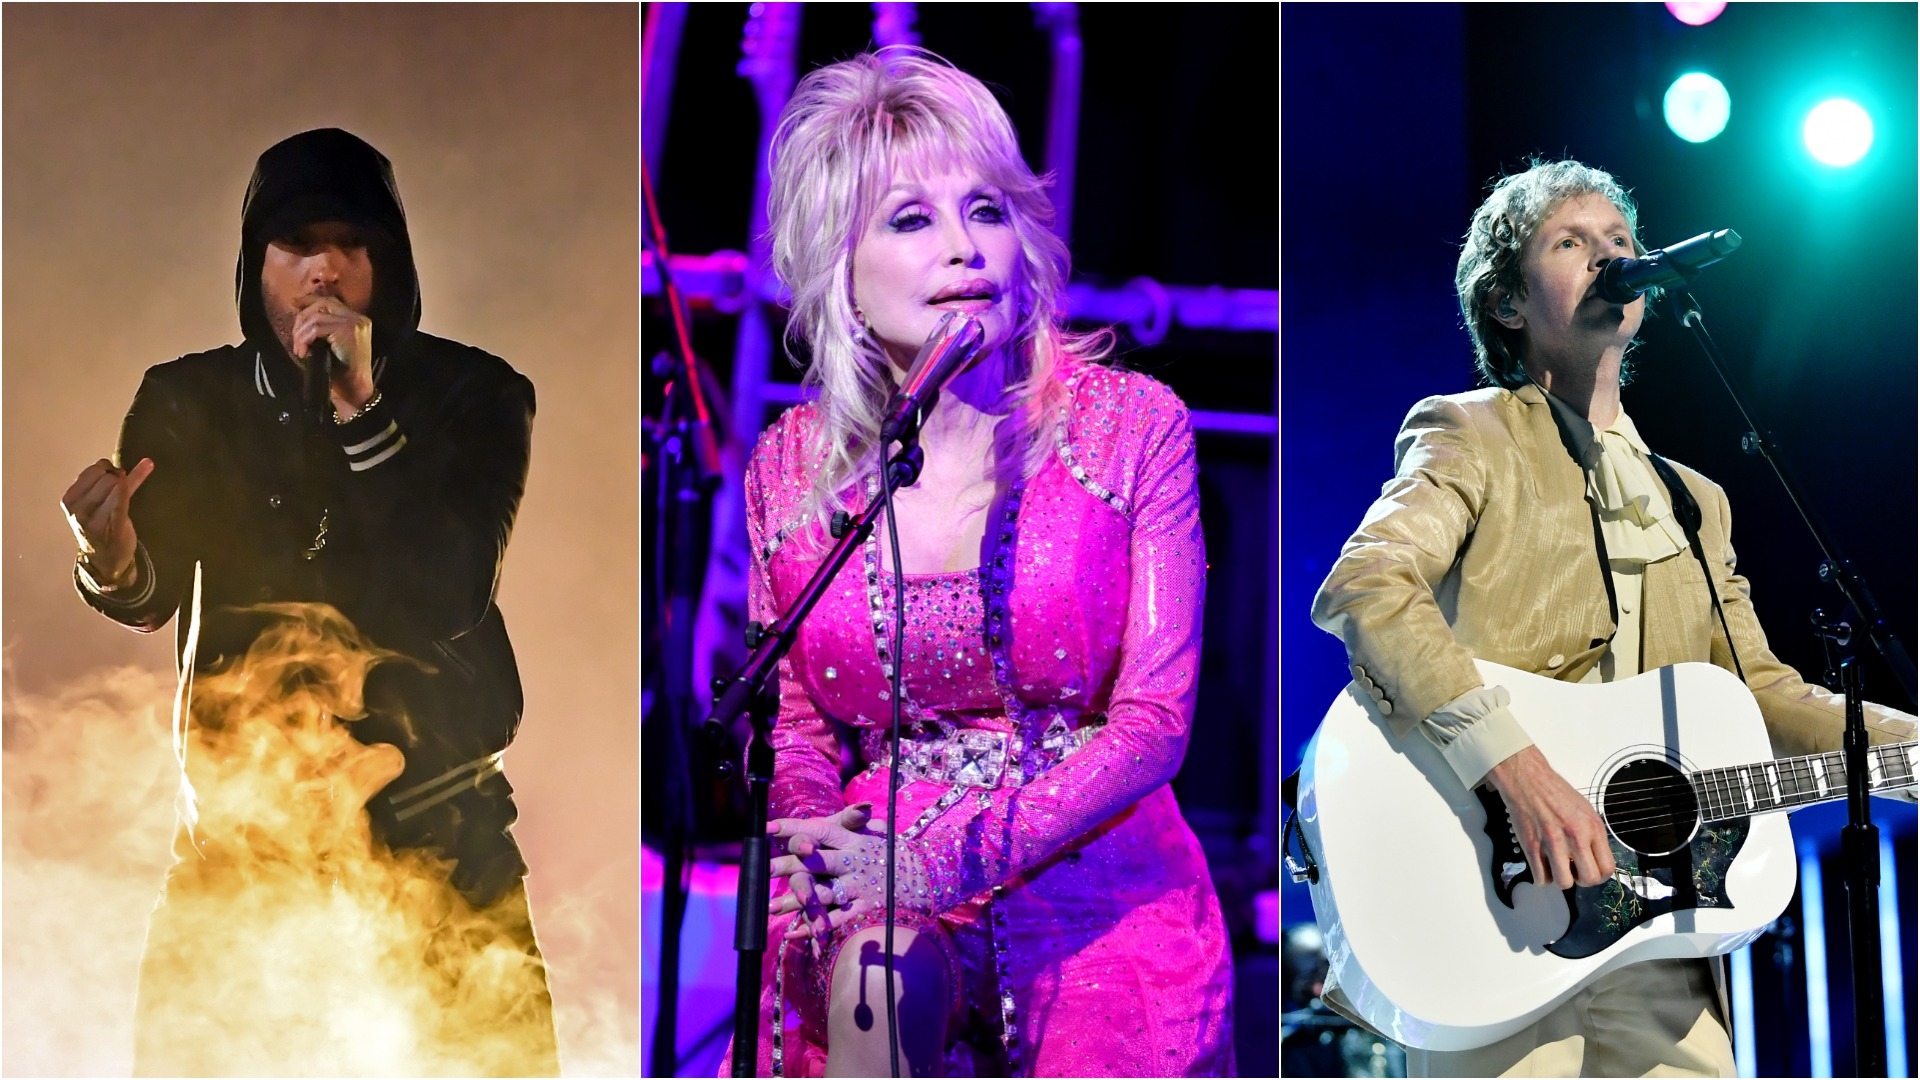 Dolly Parton, Eminem, and Beck make this year’s list of Rock And Roll Hall Of Fame nominees